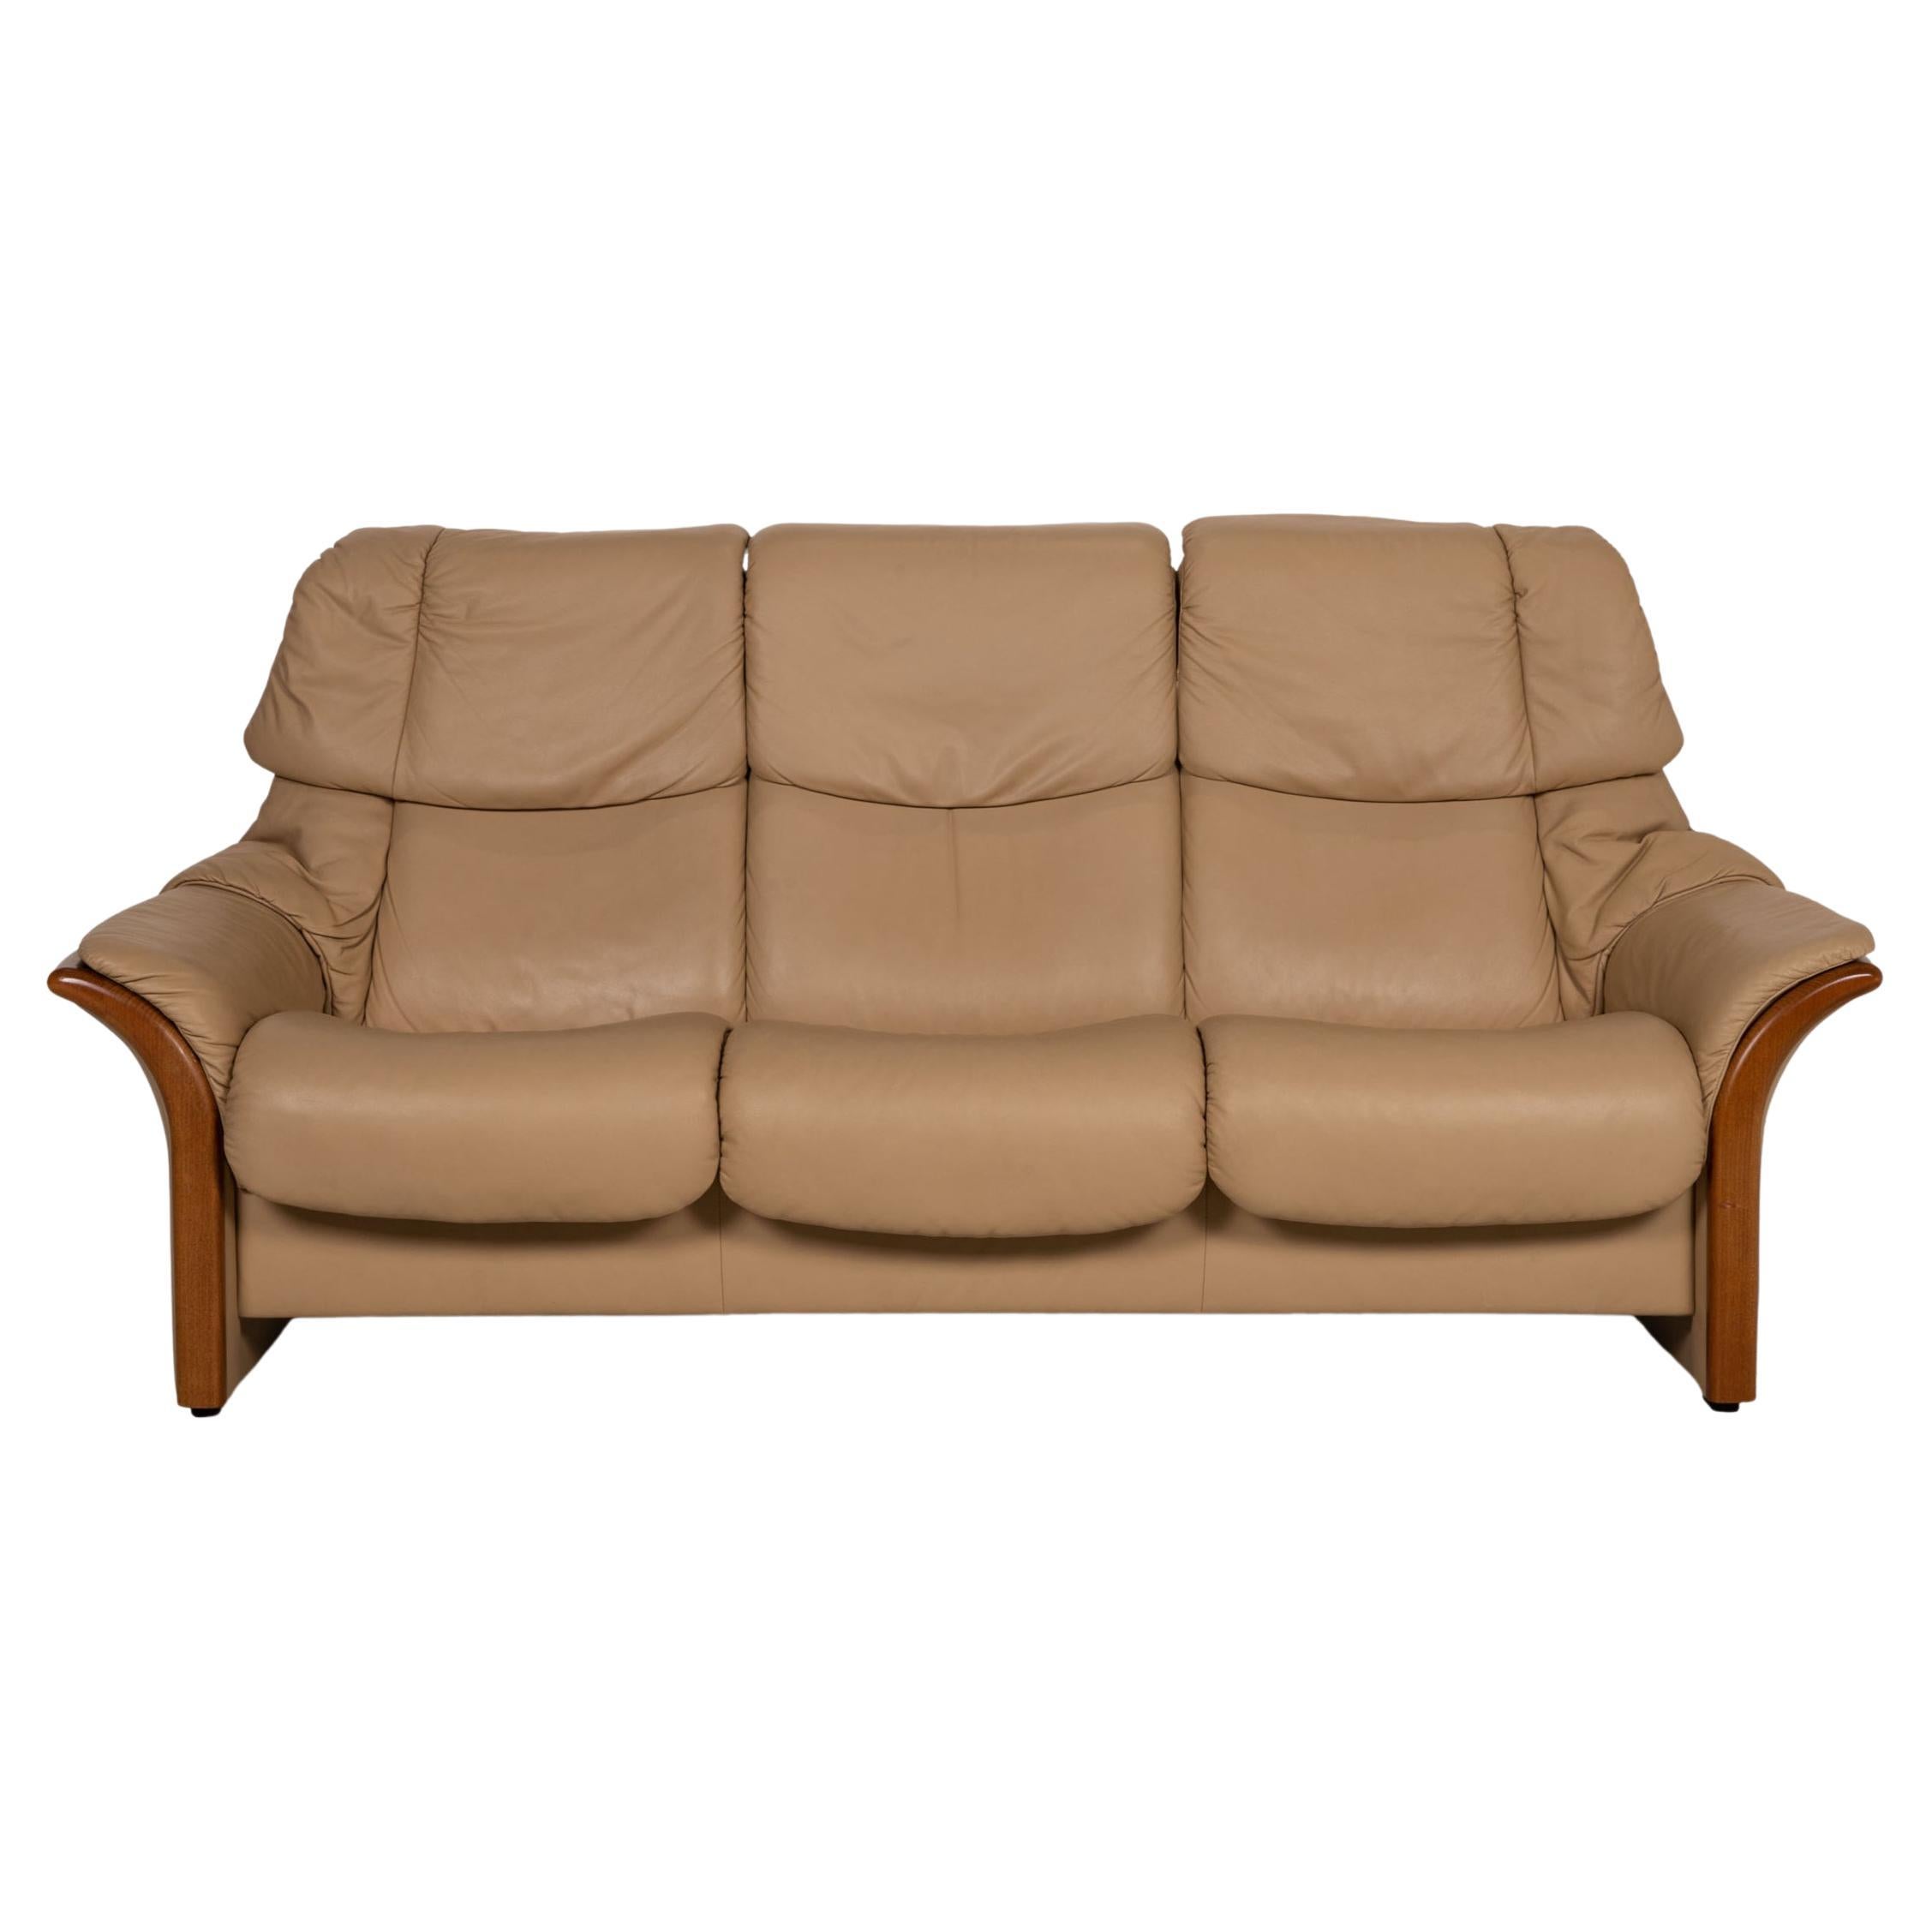 Stressless Eldorado Leather Sofa Beige Three Seater Couch For Sale